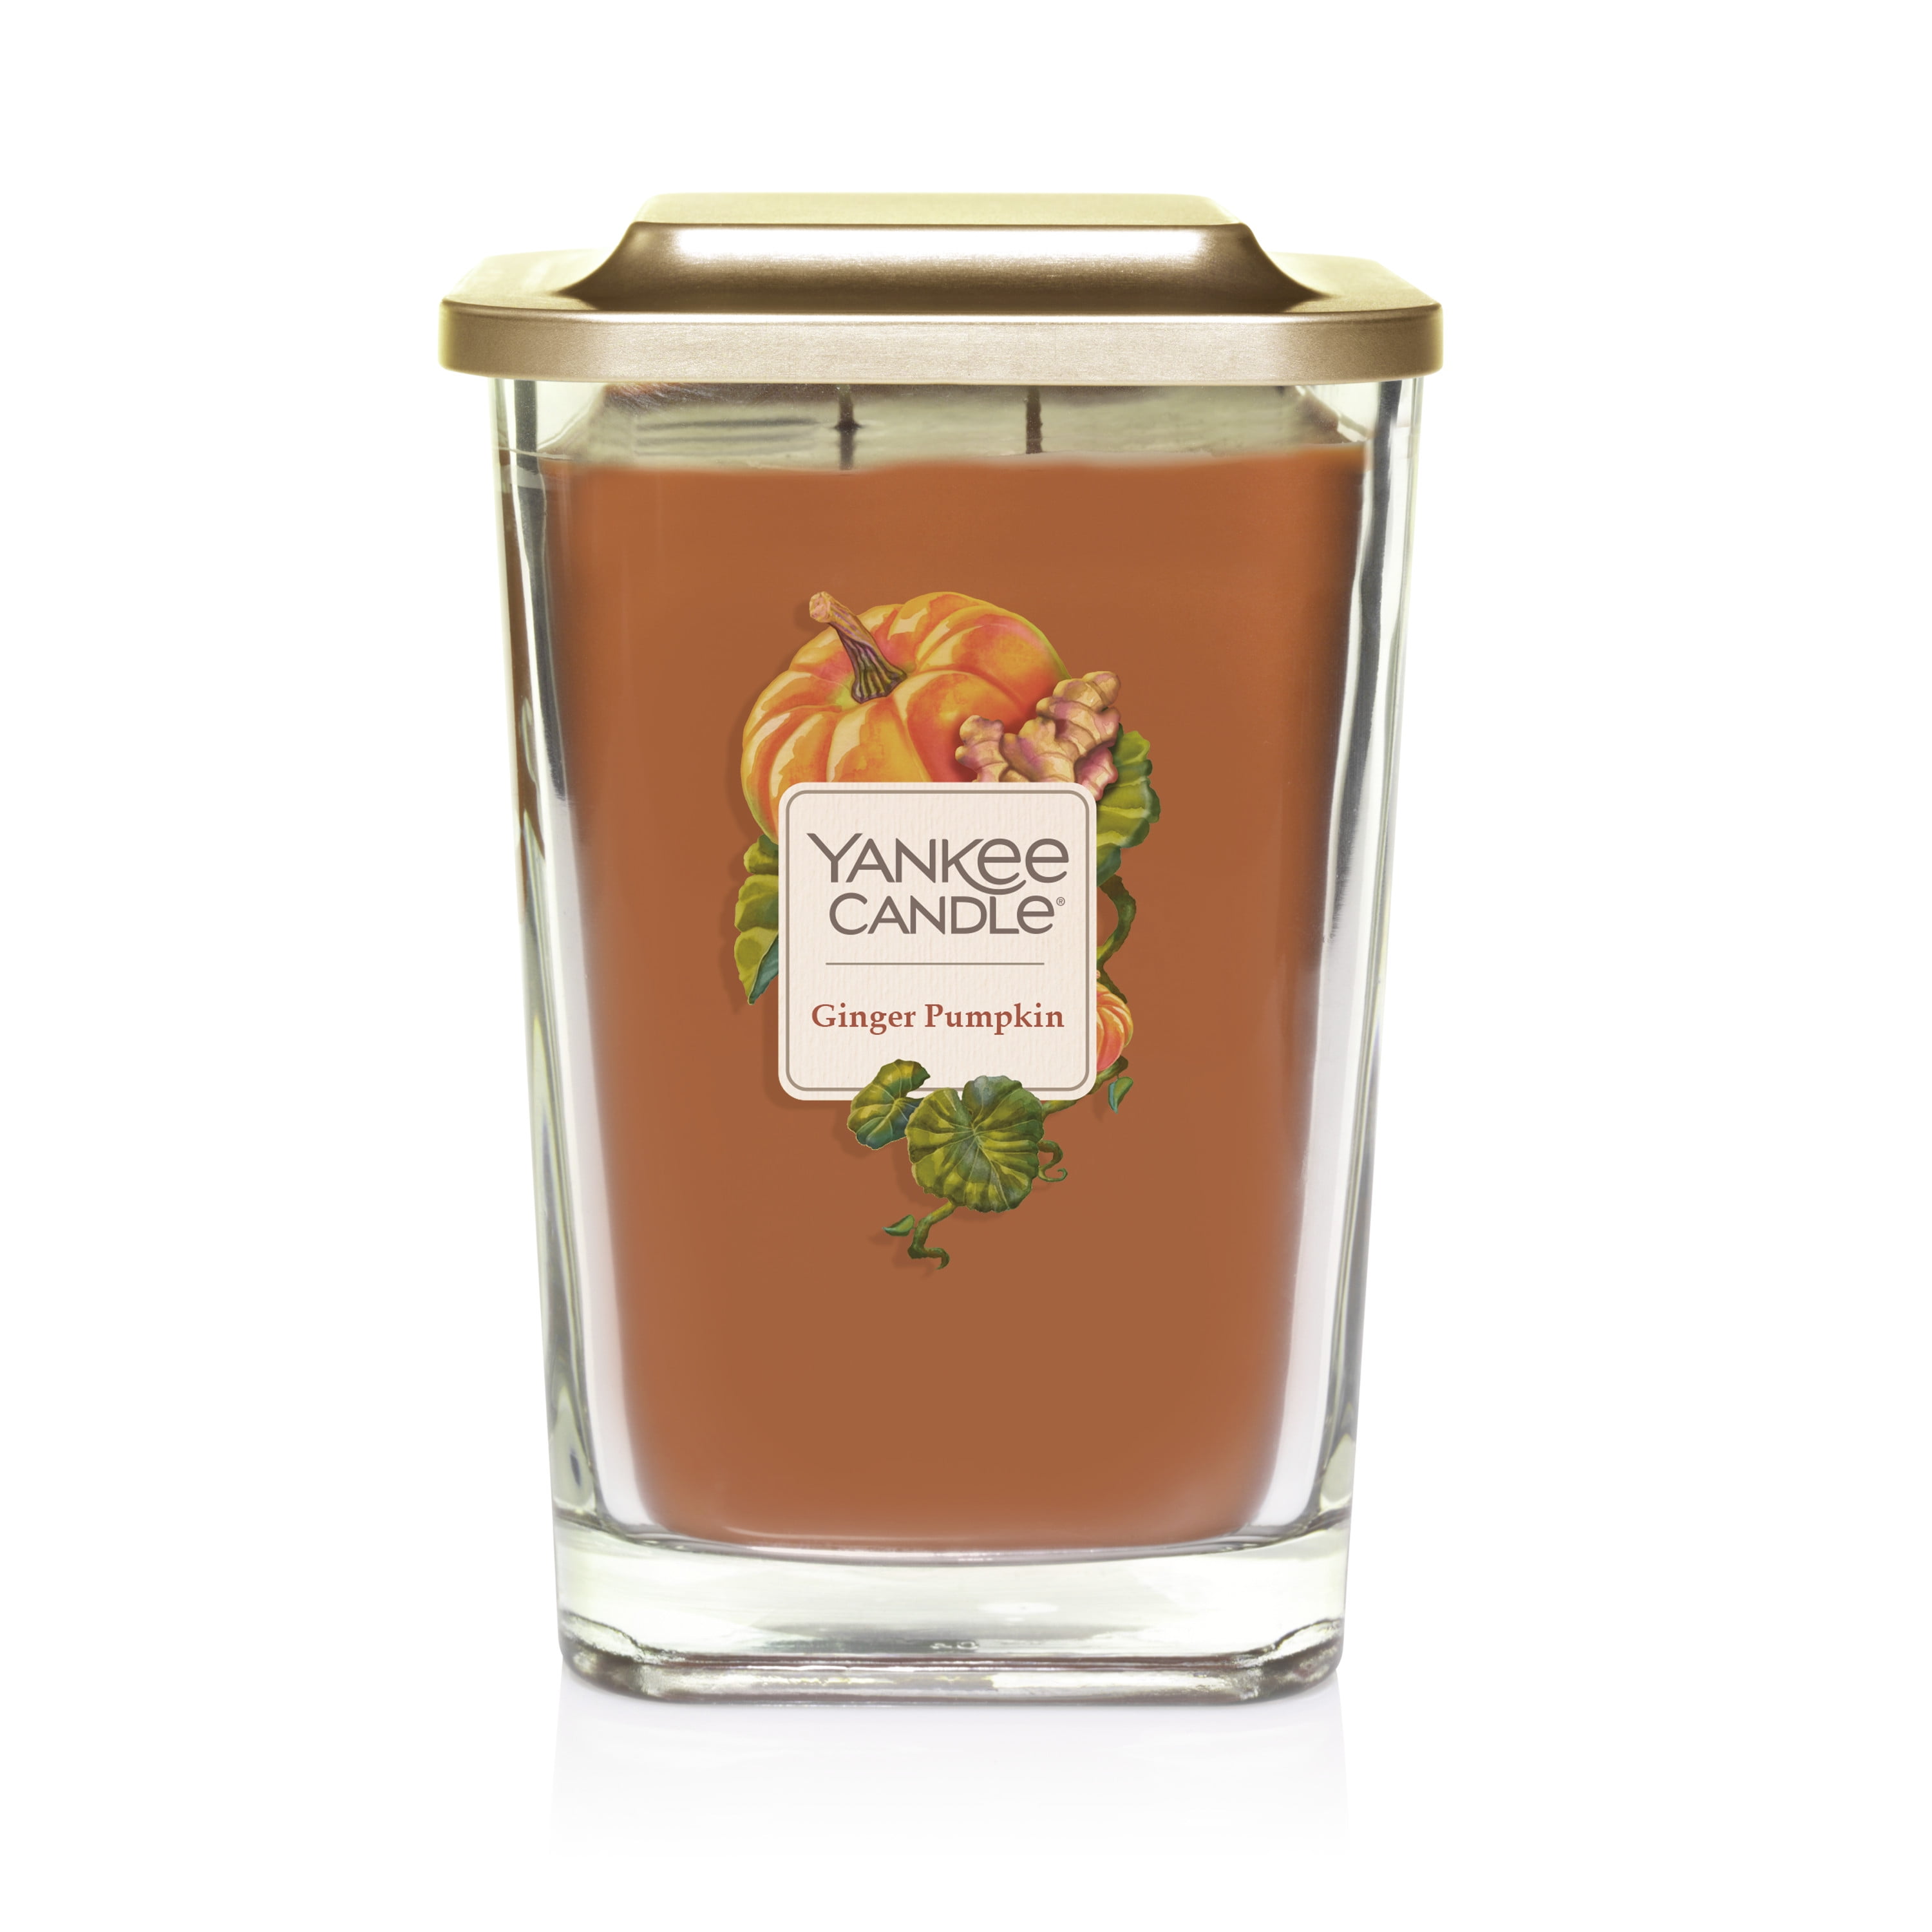 Large 2-Wick Yankee Candle Elevation Collection with Platform Lid Ginger Pumpkin Scented Candle 80 Hour Burn Time